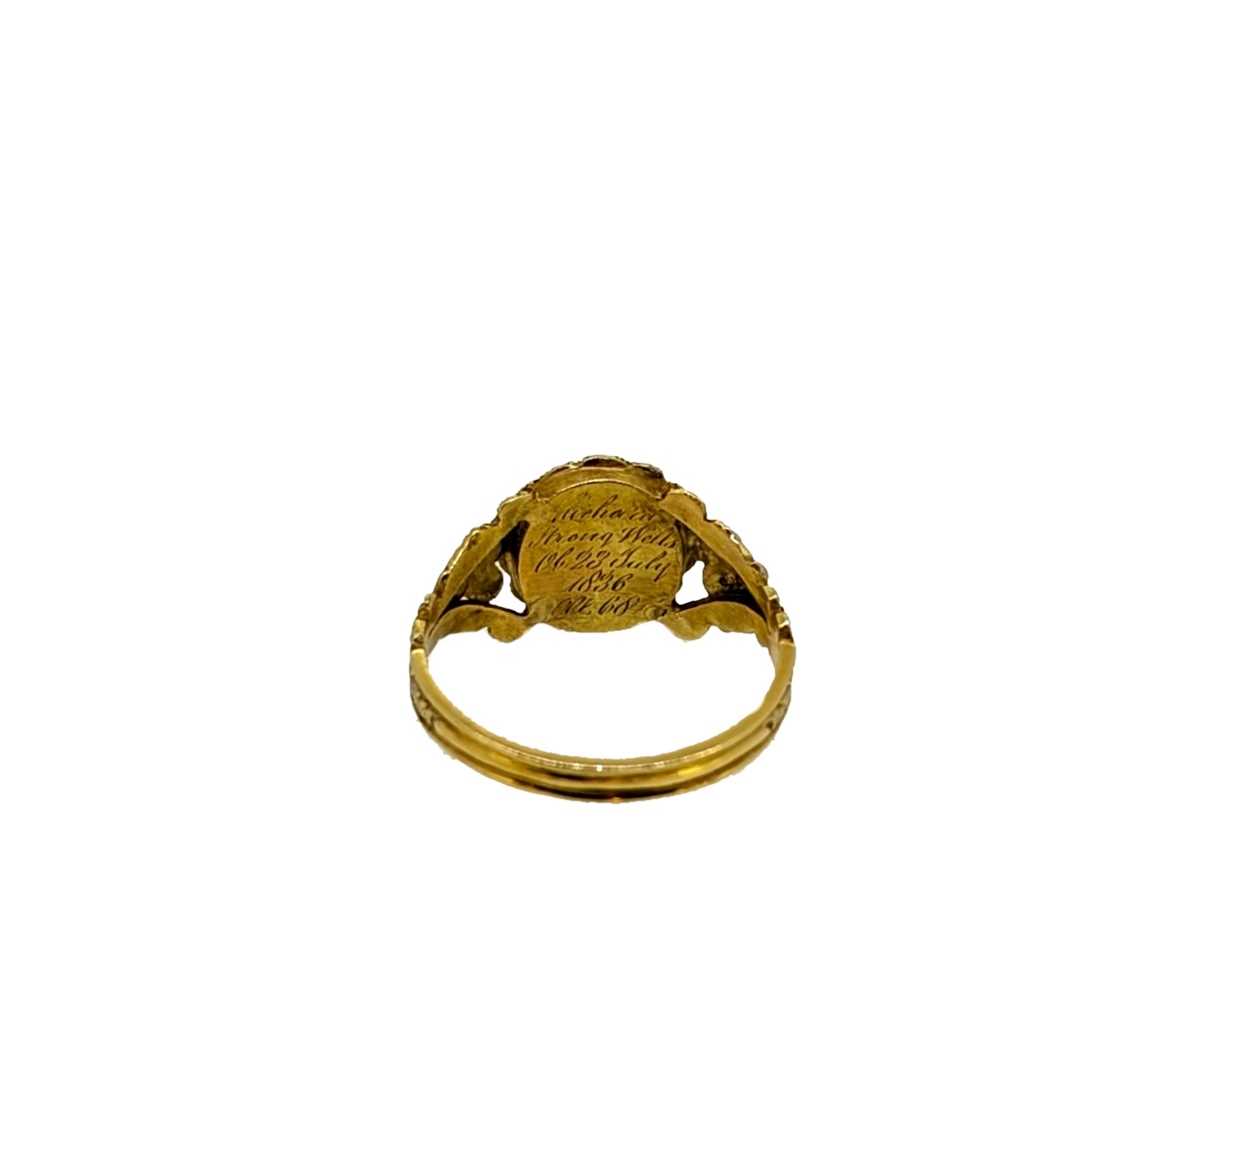 A 19th century mourning ring, - Image 3 of 4